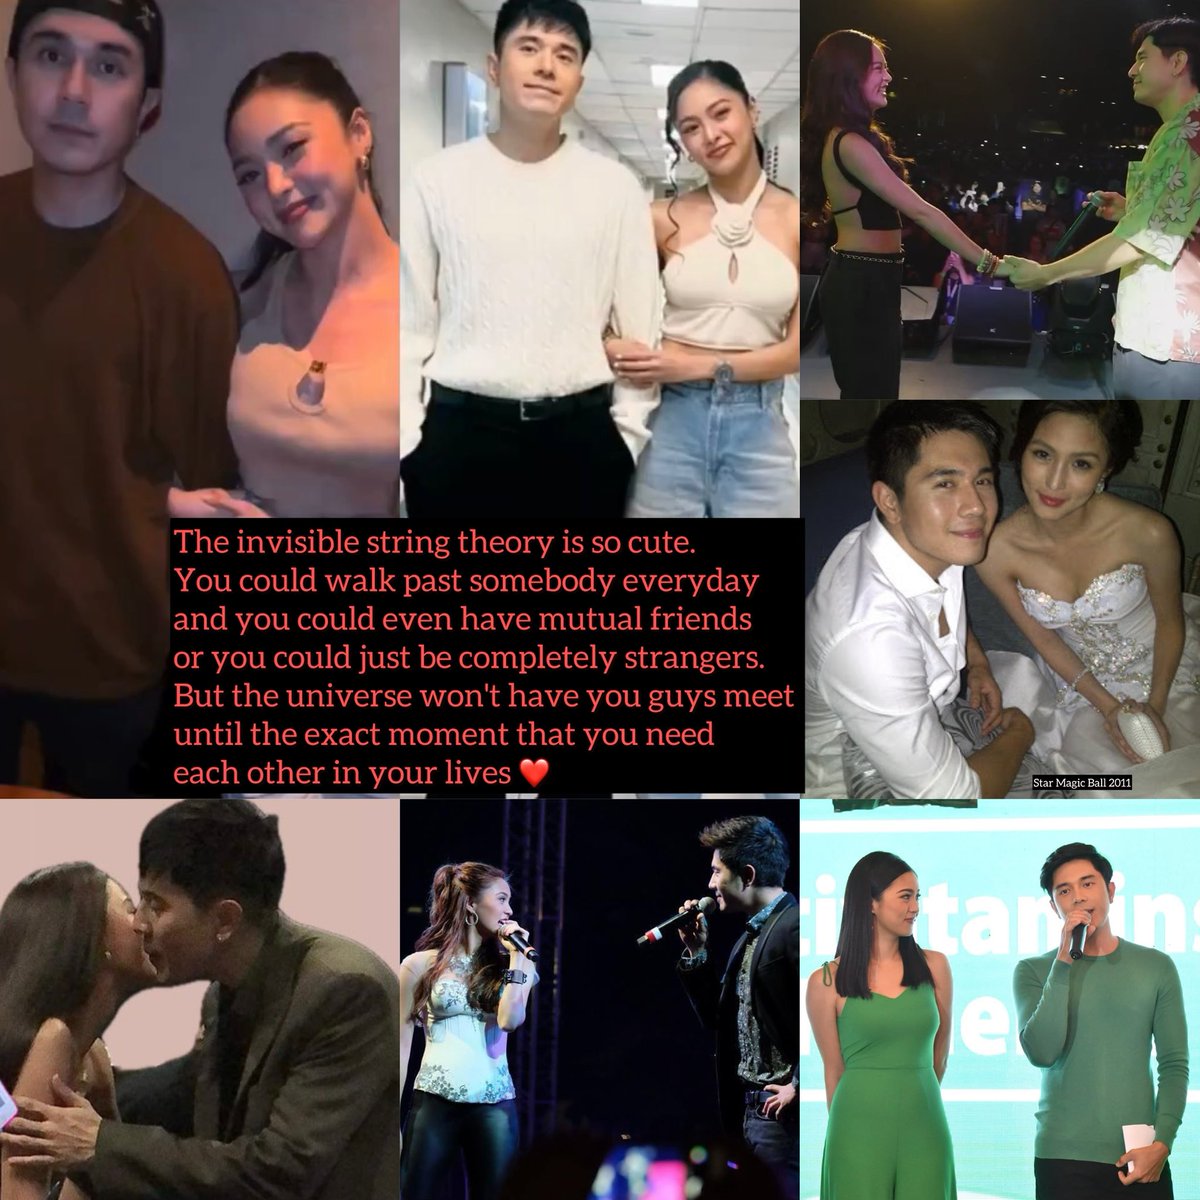 The invisible string theory is so cute.
You could walk past somebody everyday and you could even have mutual friends or you could just be completely strangers.
But the universe won't have you guys meet until the exact moment that you need each other in your lives 💚
#KimPau